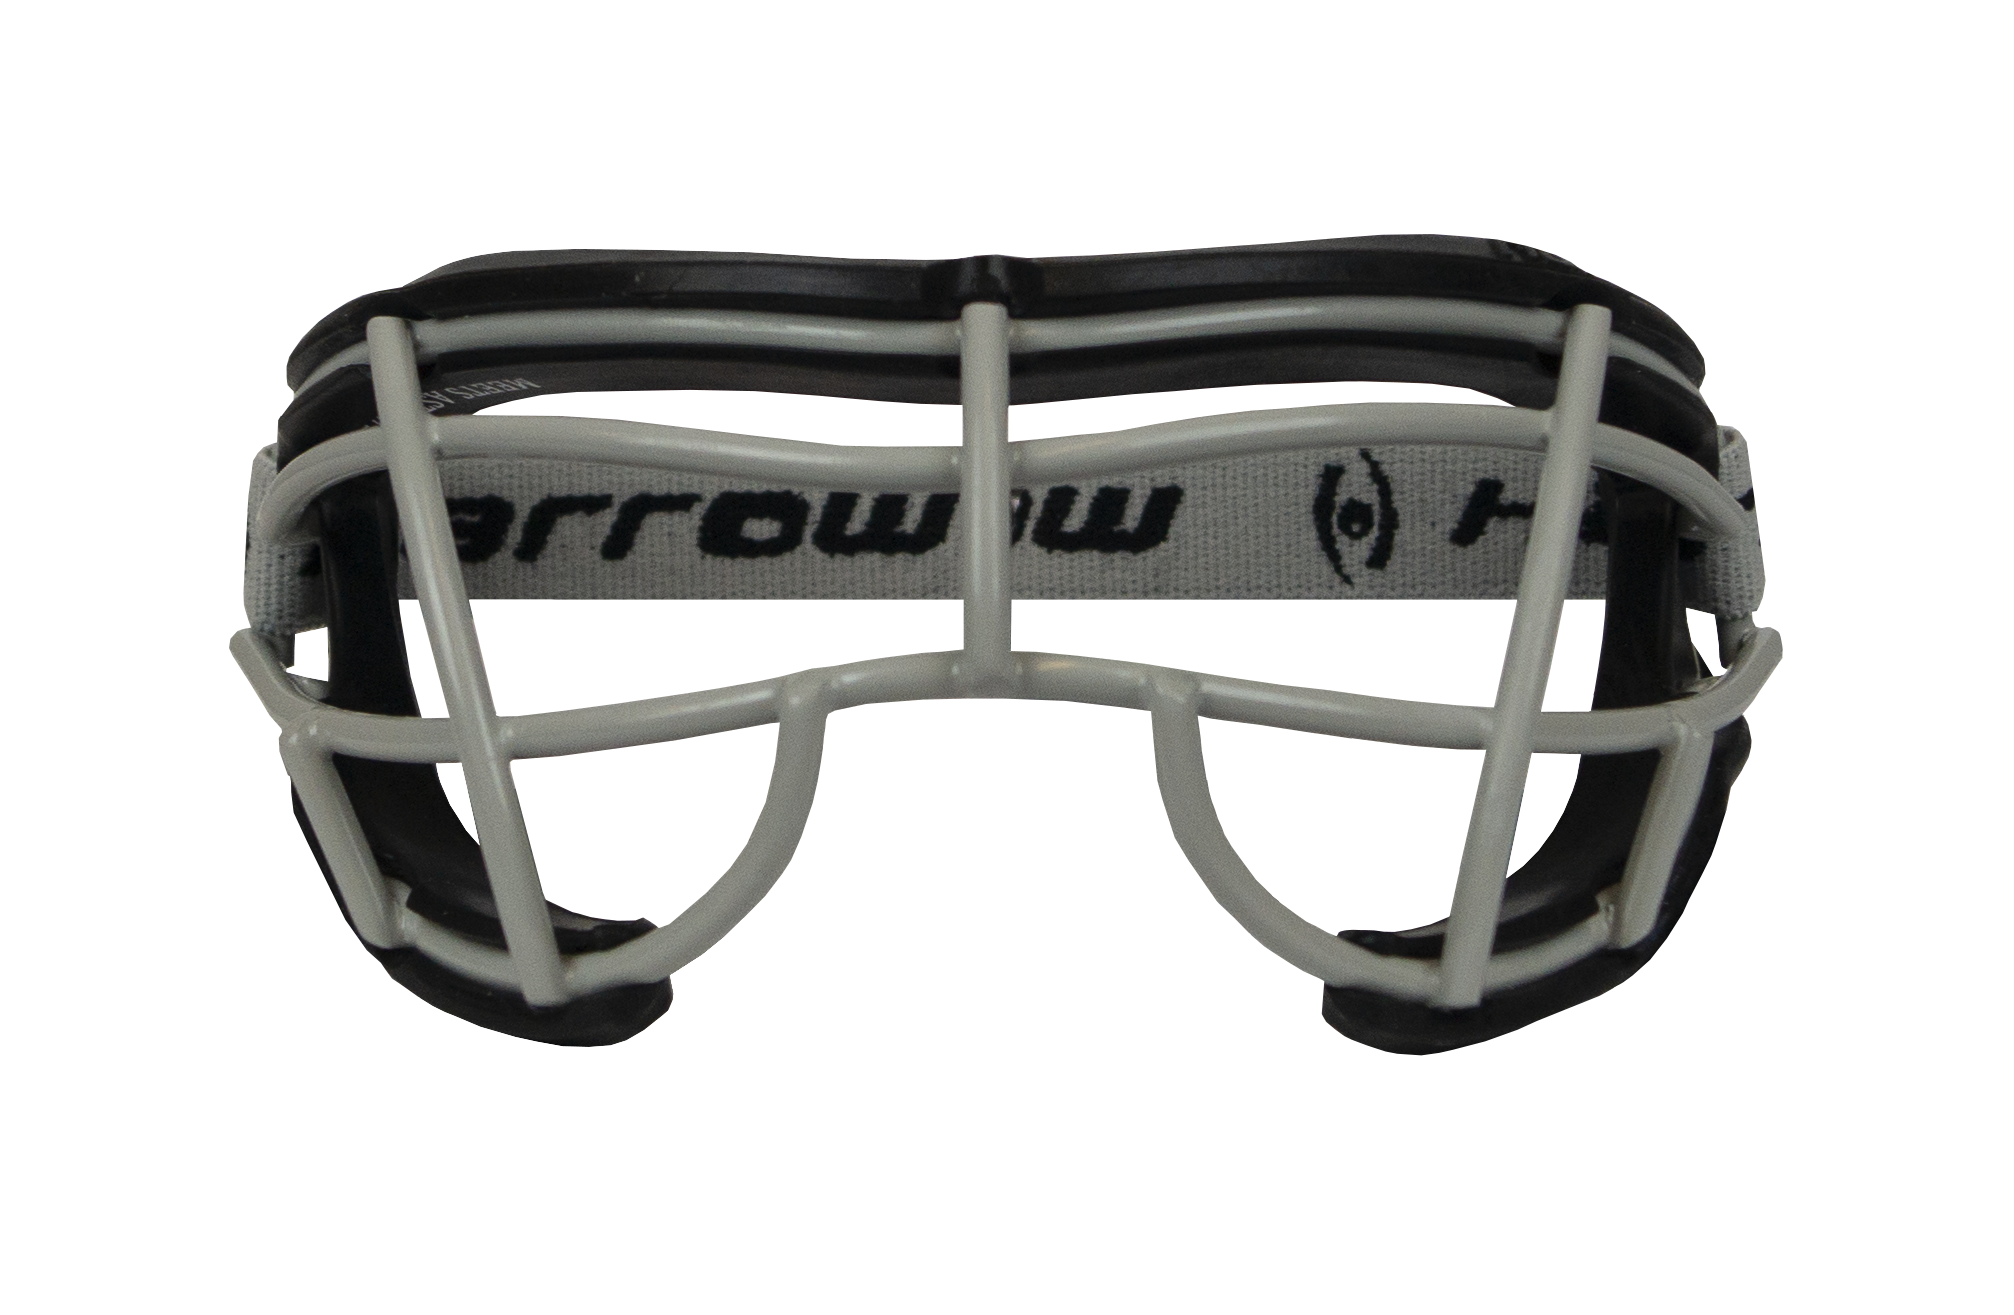 STX 2see-s Womens Adult Lacrosse/field Hockey Goggles Grey for sale online 